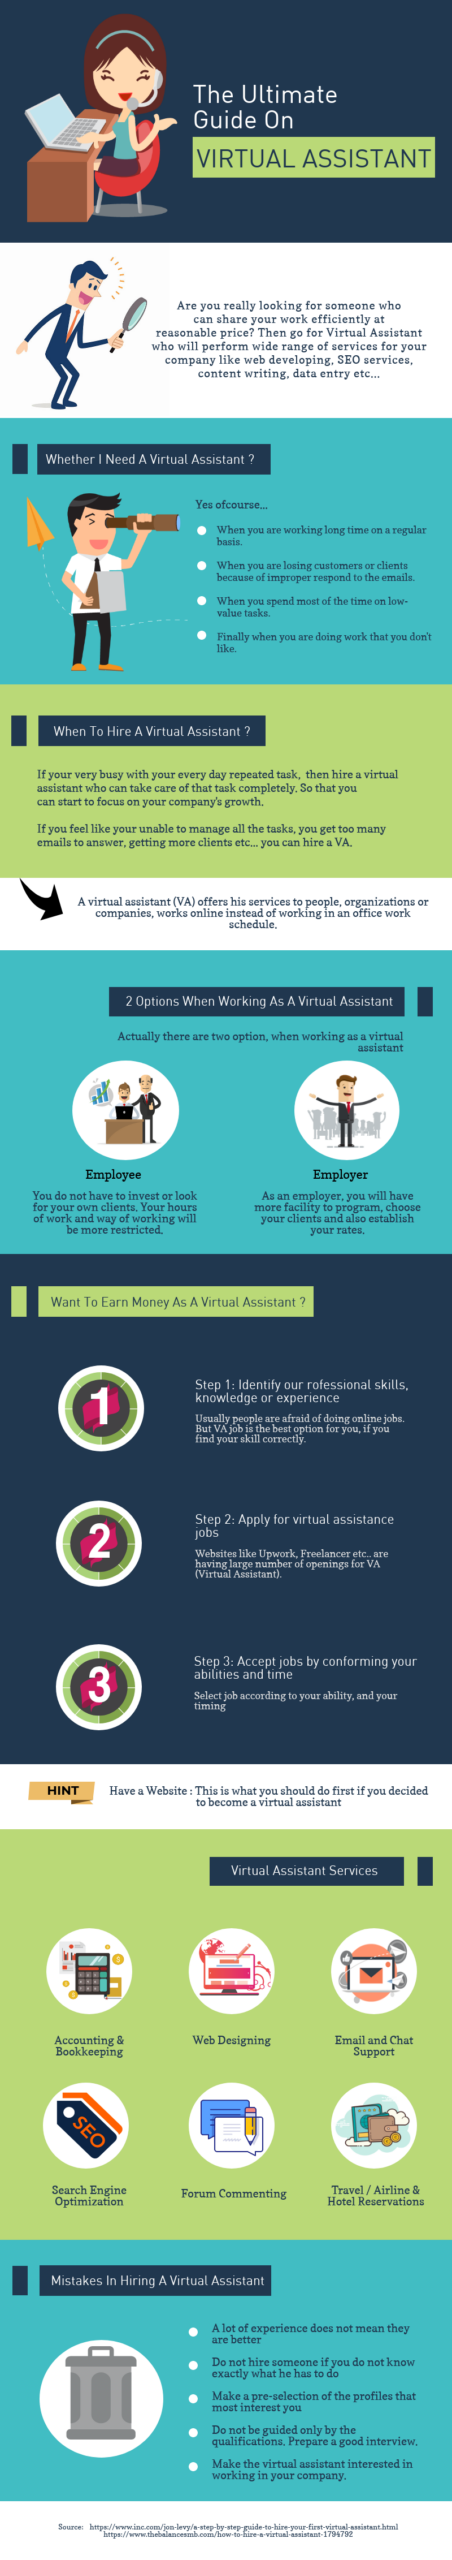 The Ultimate Guide on Virtual Assistant Infograpic